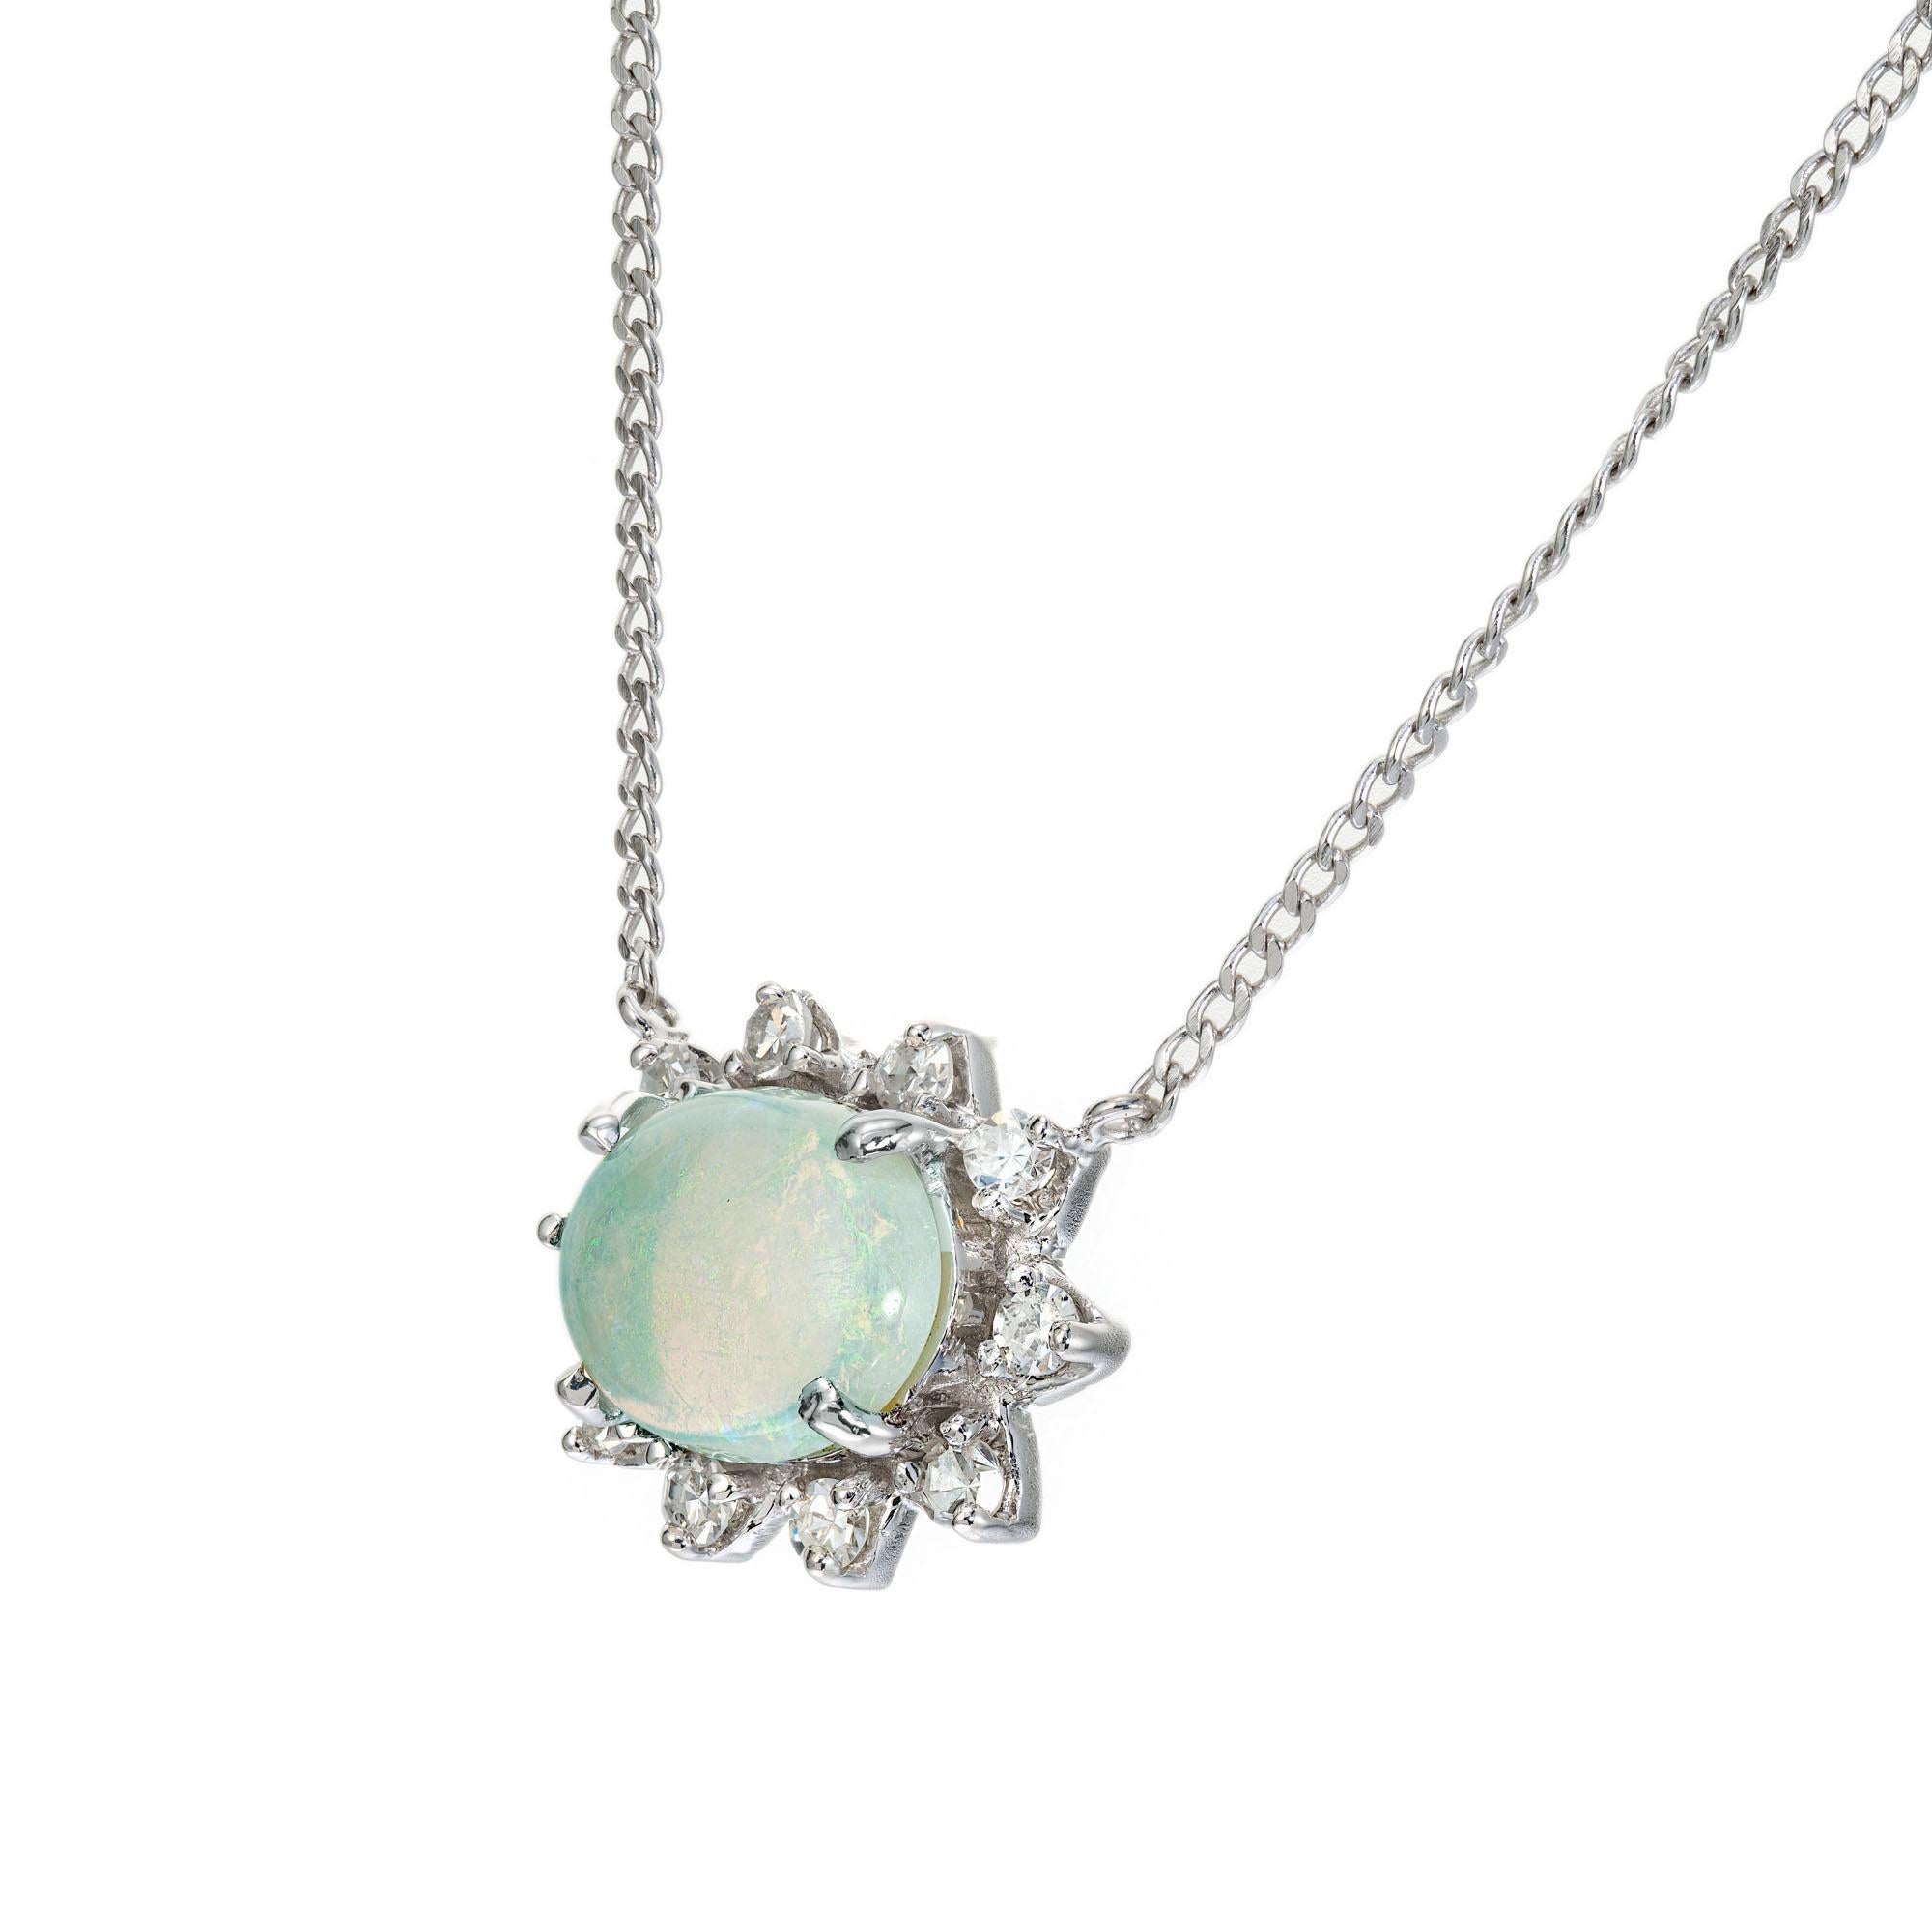 1940's late Art Deco Opal and diamond necklace. 1.25ct oval natural Australian bluish green cabochon opal with a halo of 10 sing cut diamonds. 16 inches. 

1 oval cabochon bluish green opal, approx. 1.25cts
10 single cut diamonds, G VS SI approx.